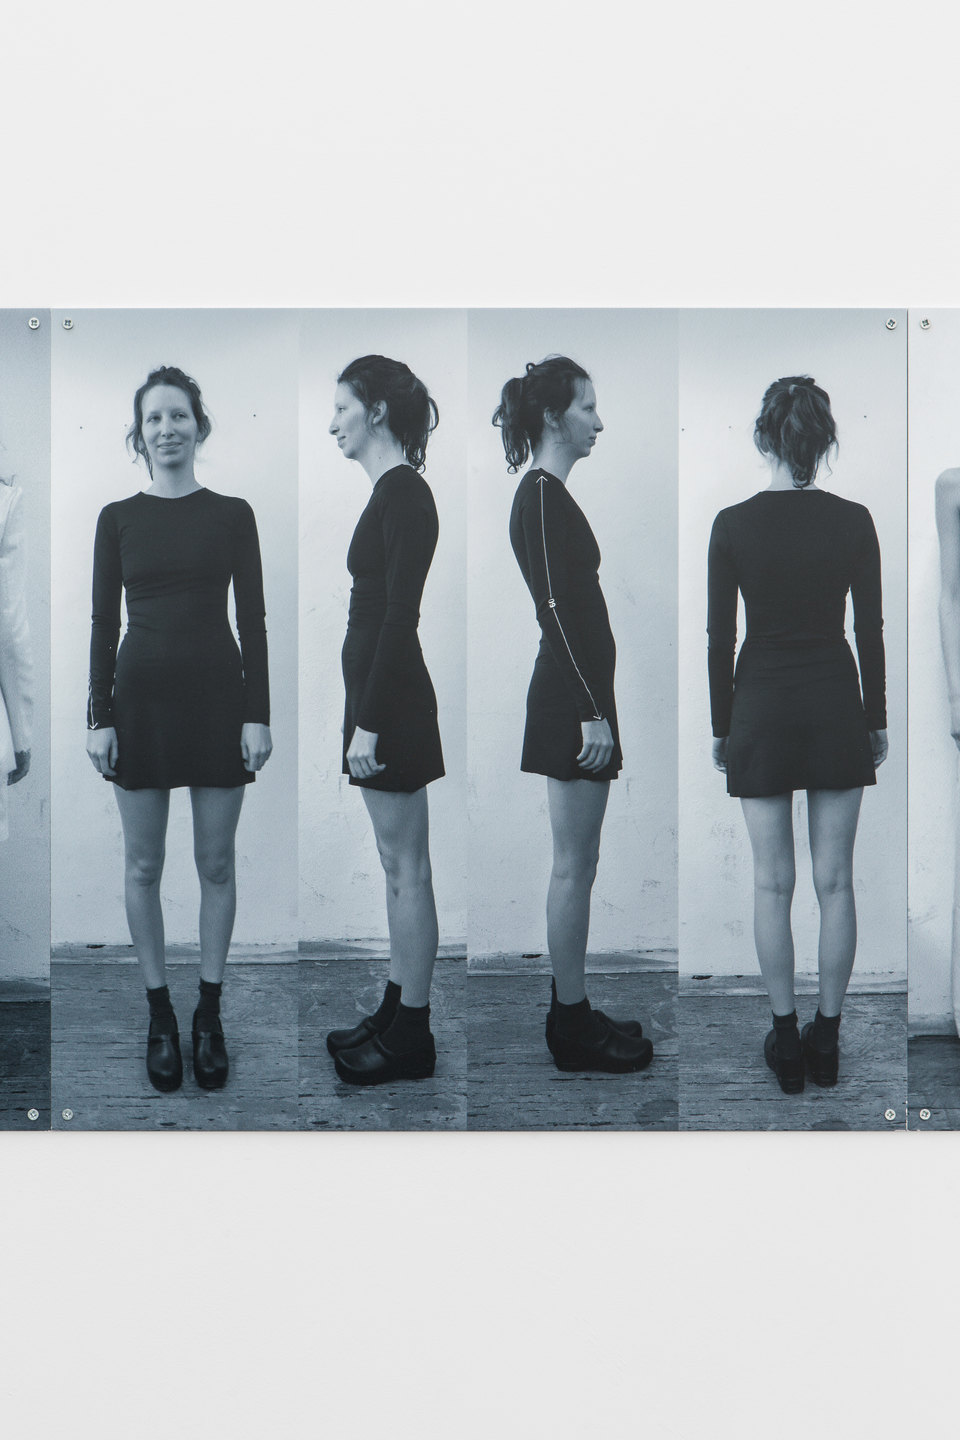 Anna-Sophie Berger, Fashion is Fast (Fitting 2013) 5, 2019, Cell Project Space